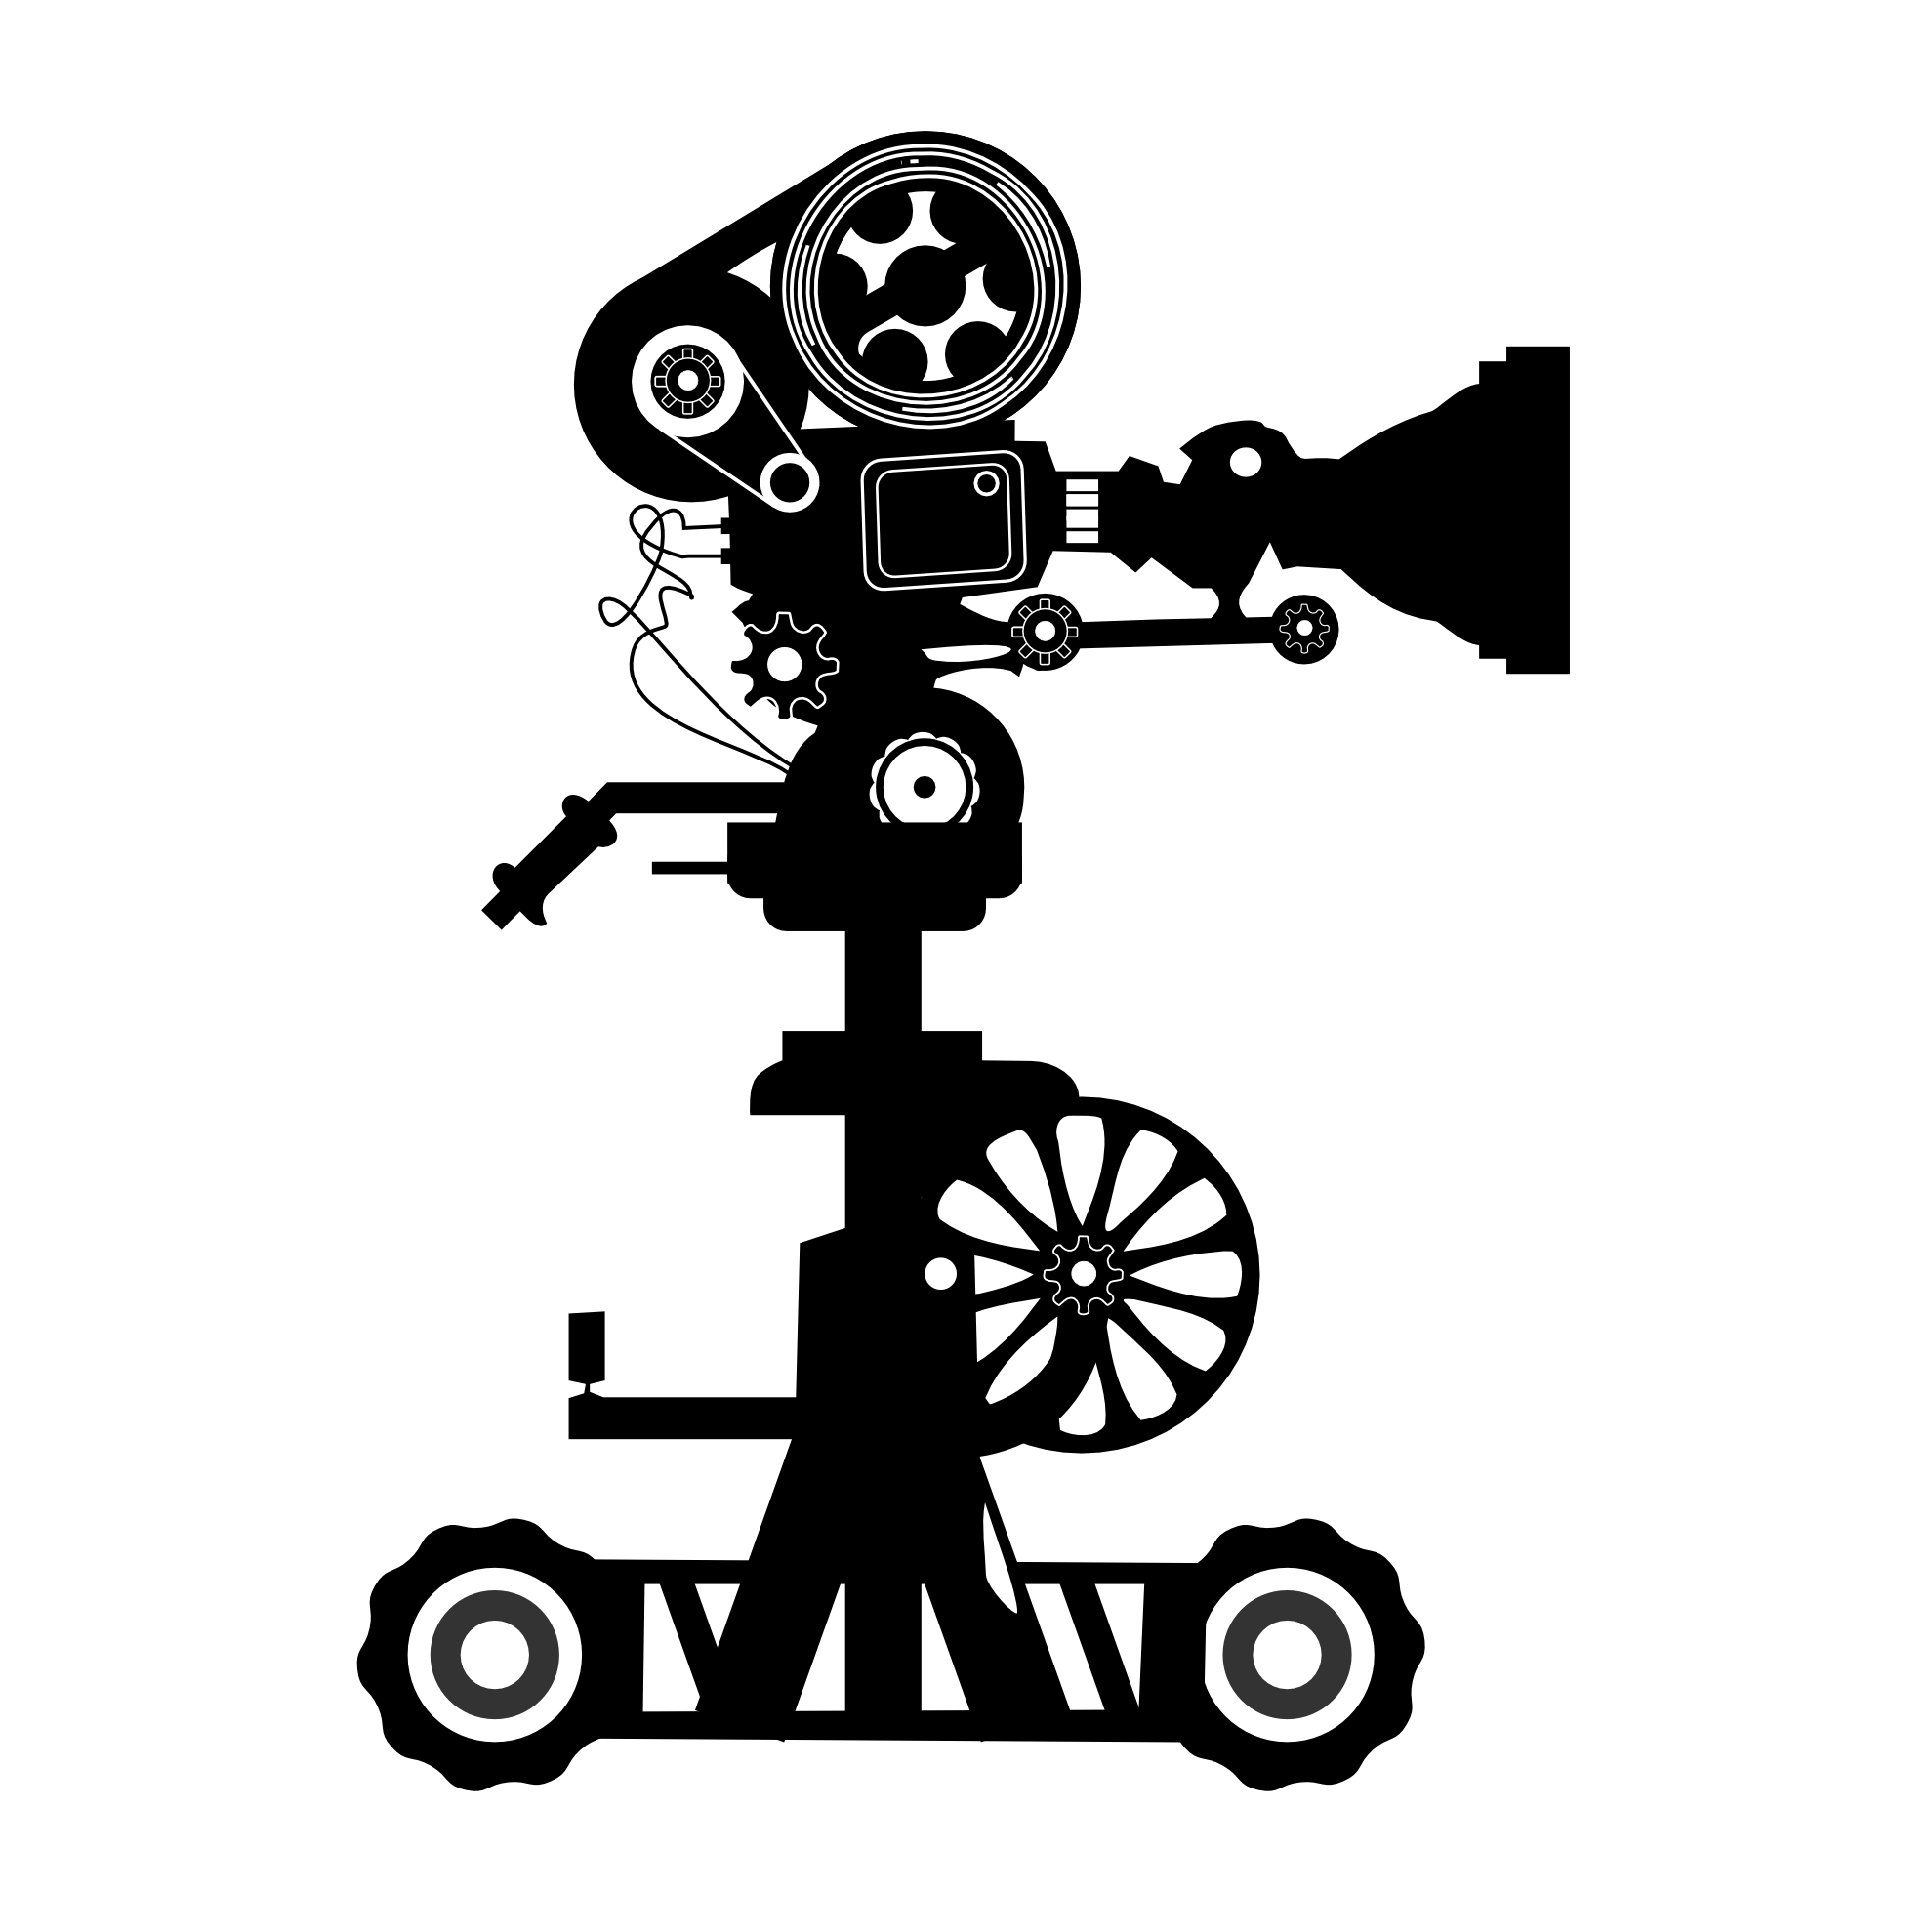 Movie Camera Logo - Movie Camera PNG HD Transparent Movie Camera HD.PNG Images. | PlusPNG